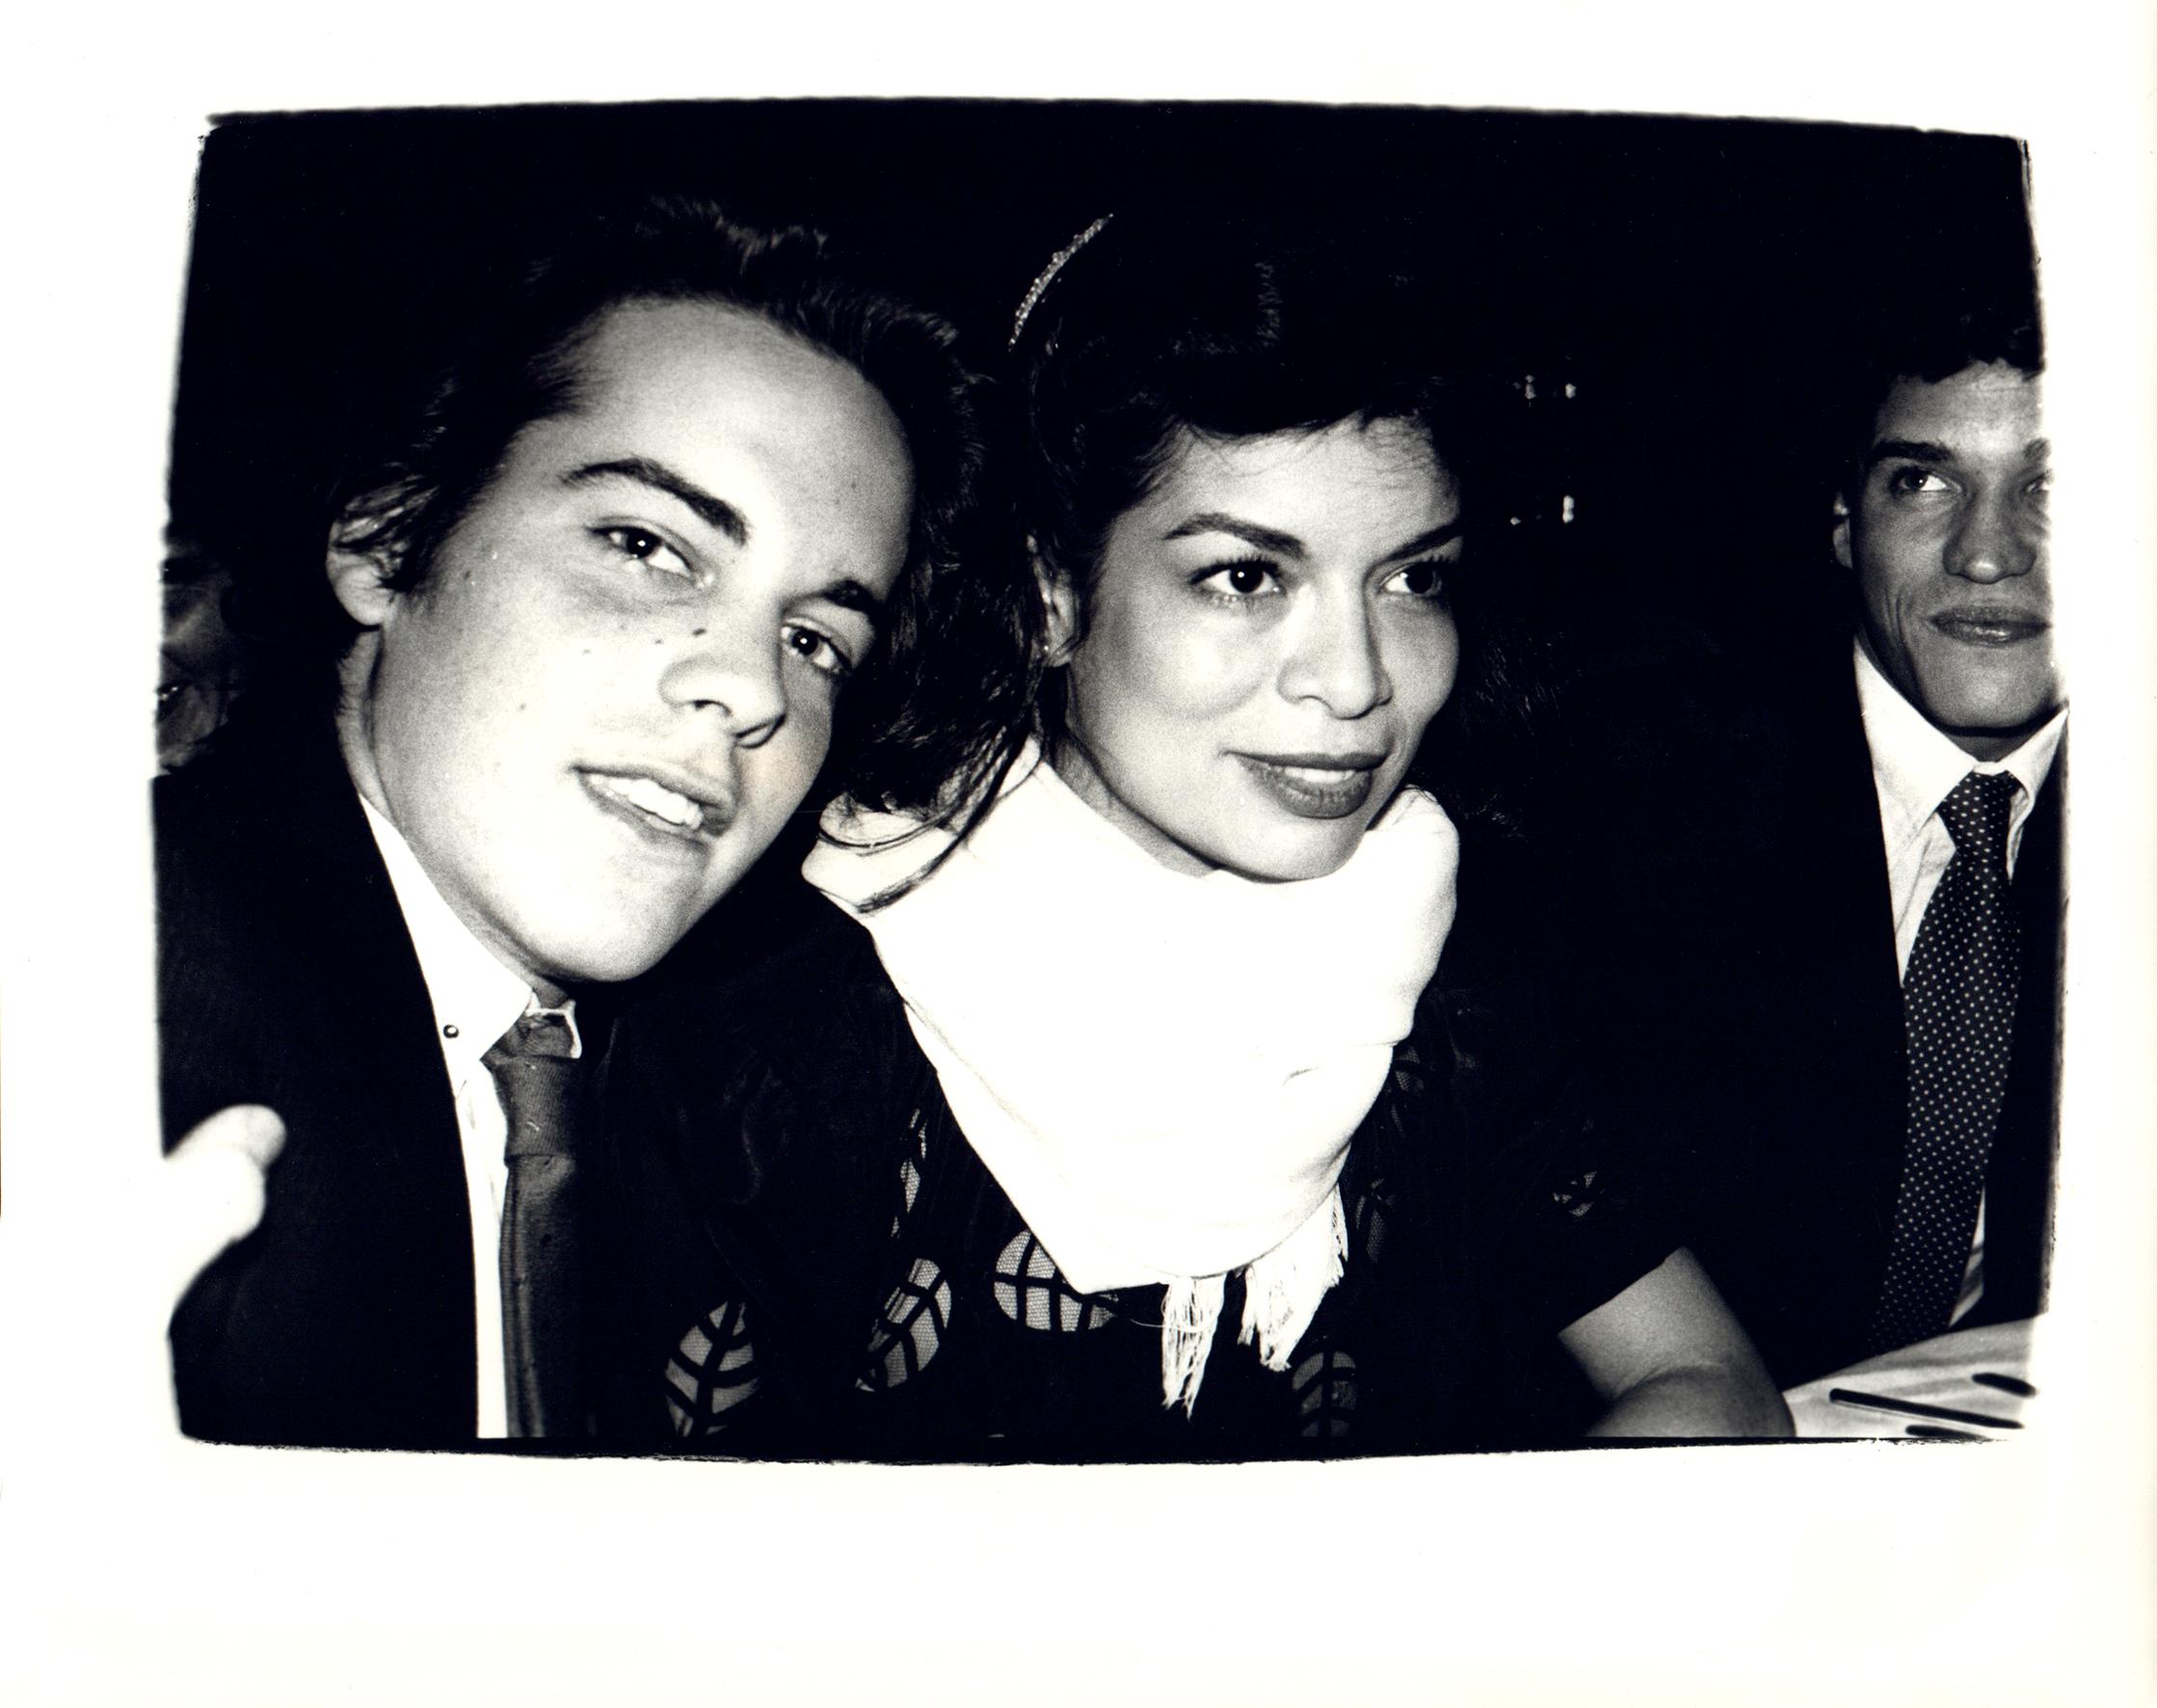 Andy Warhol Portrait Photograph - John Stockwell and Bianca Jagger